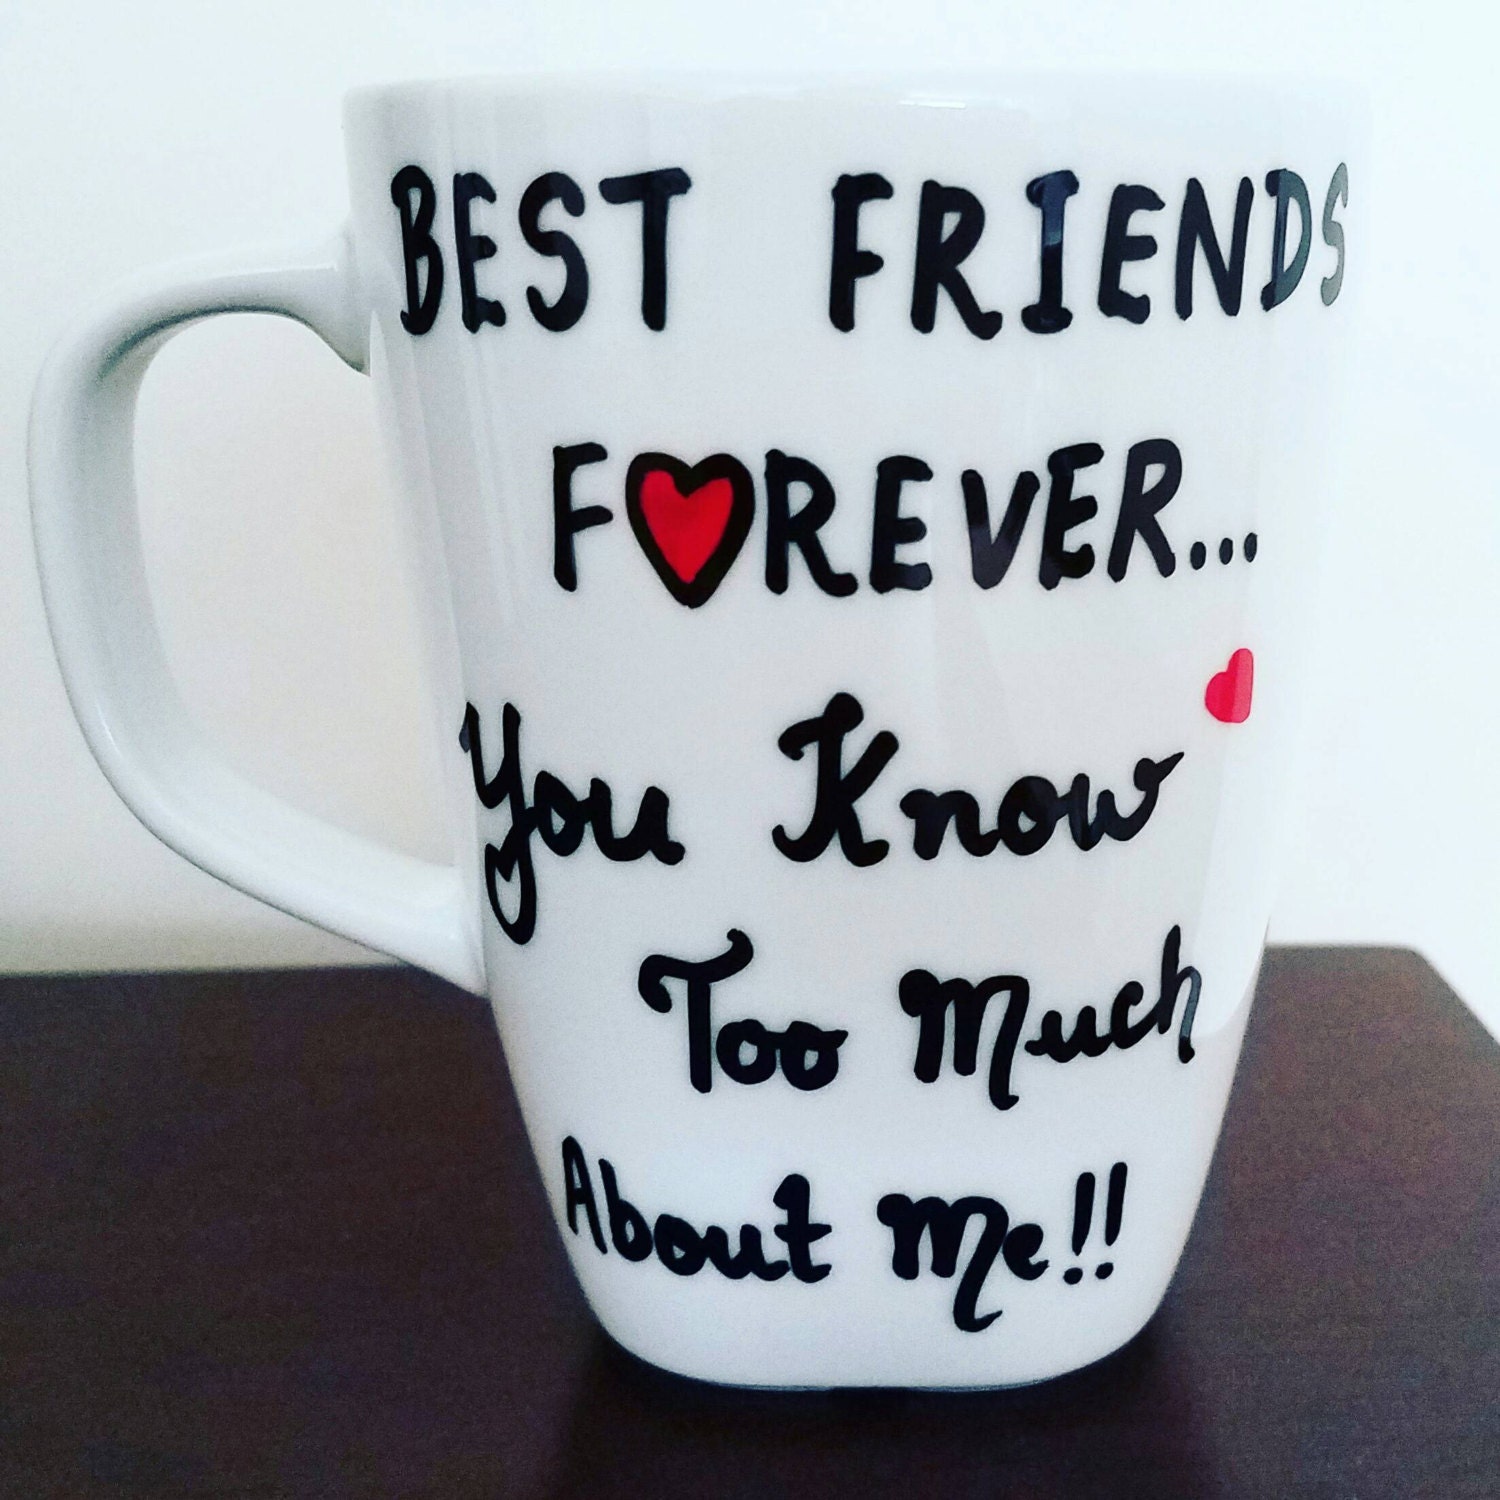 Best Friends Forever Coffee Mug Funny Gift For Friend BFF